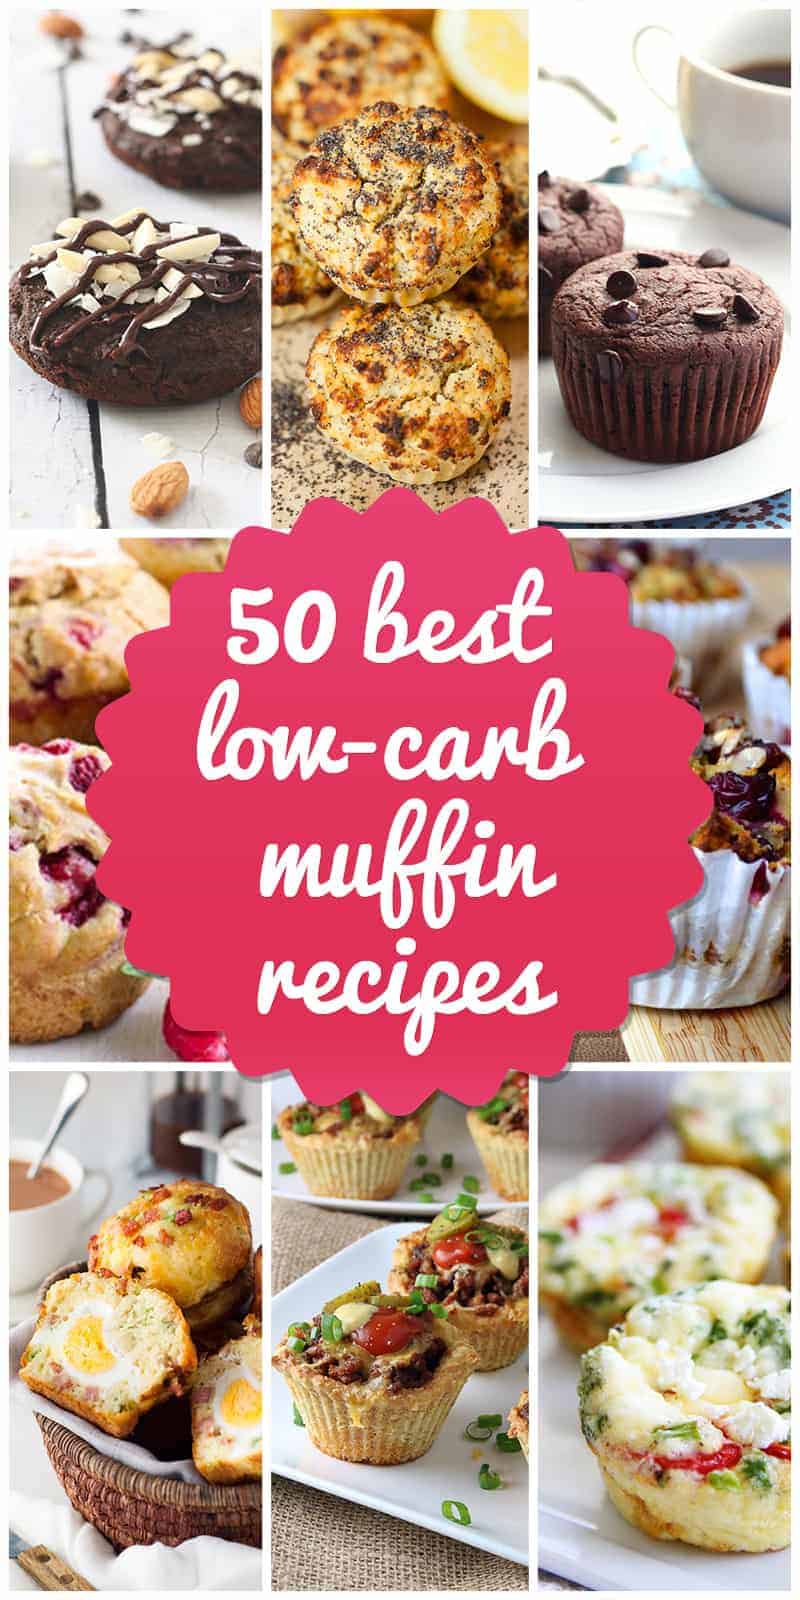 Low-Carb Muffins